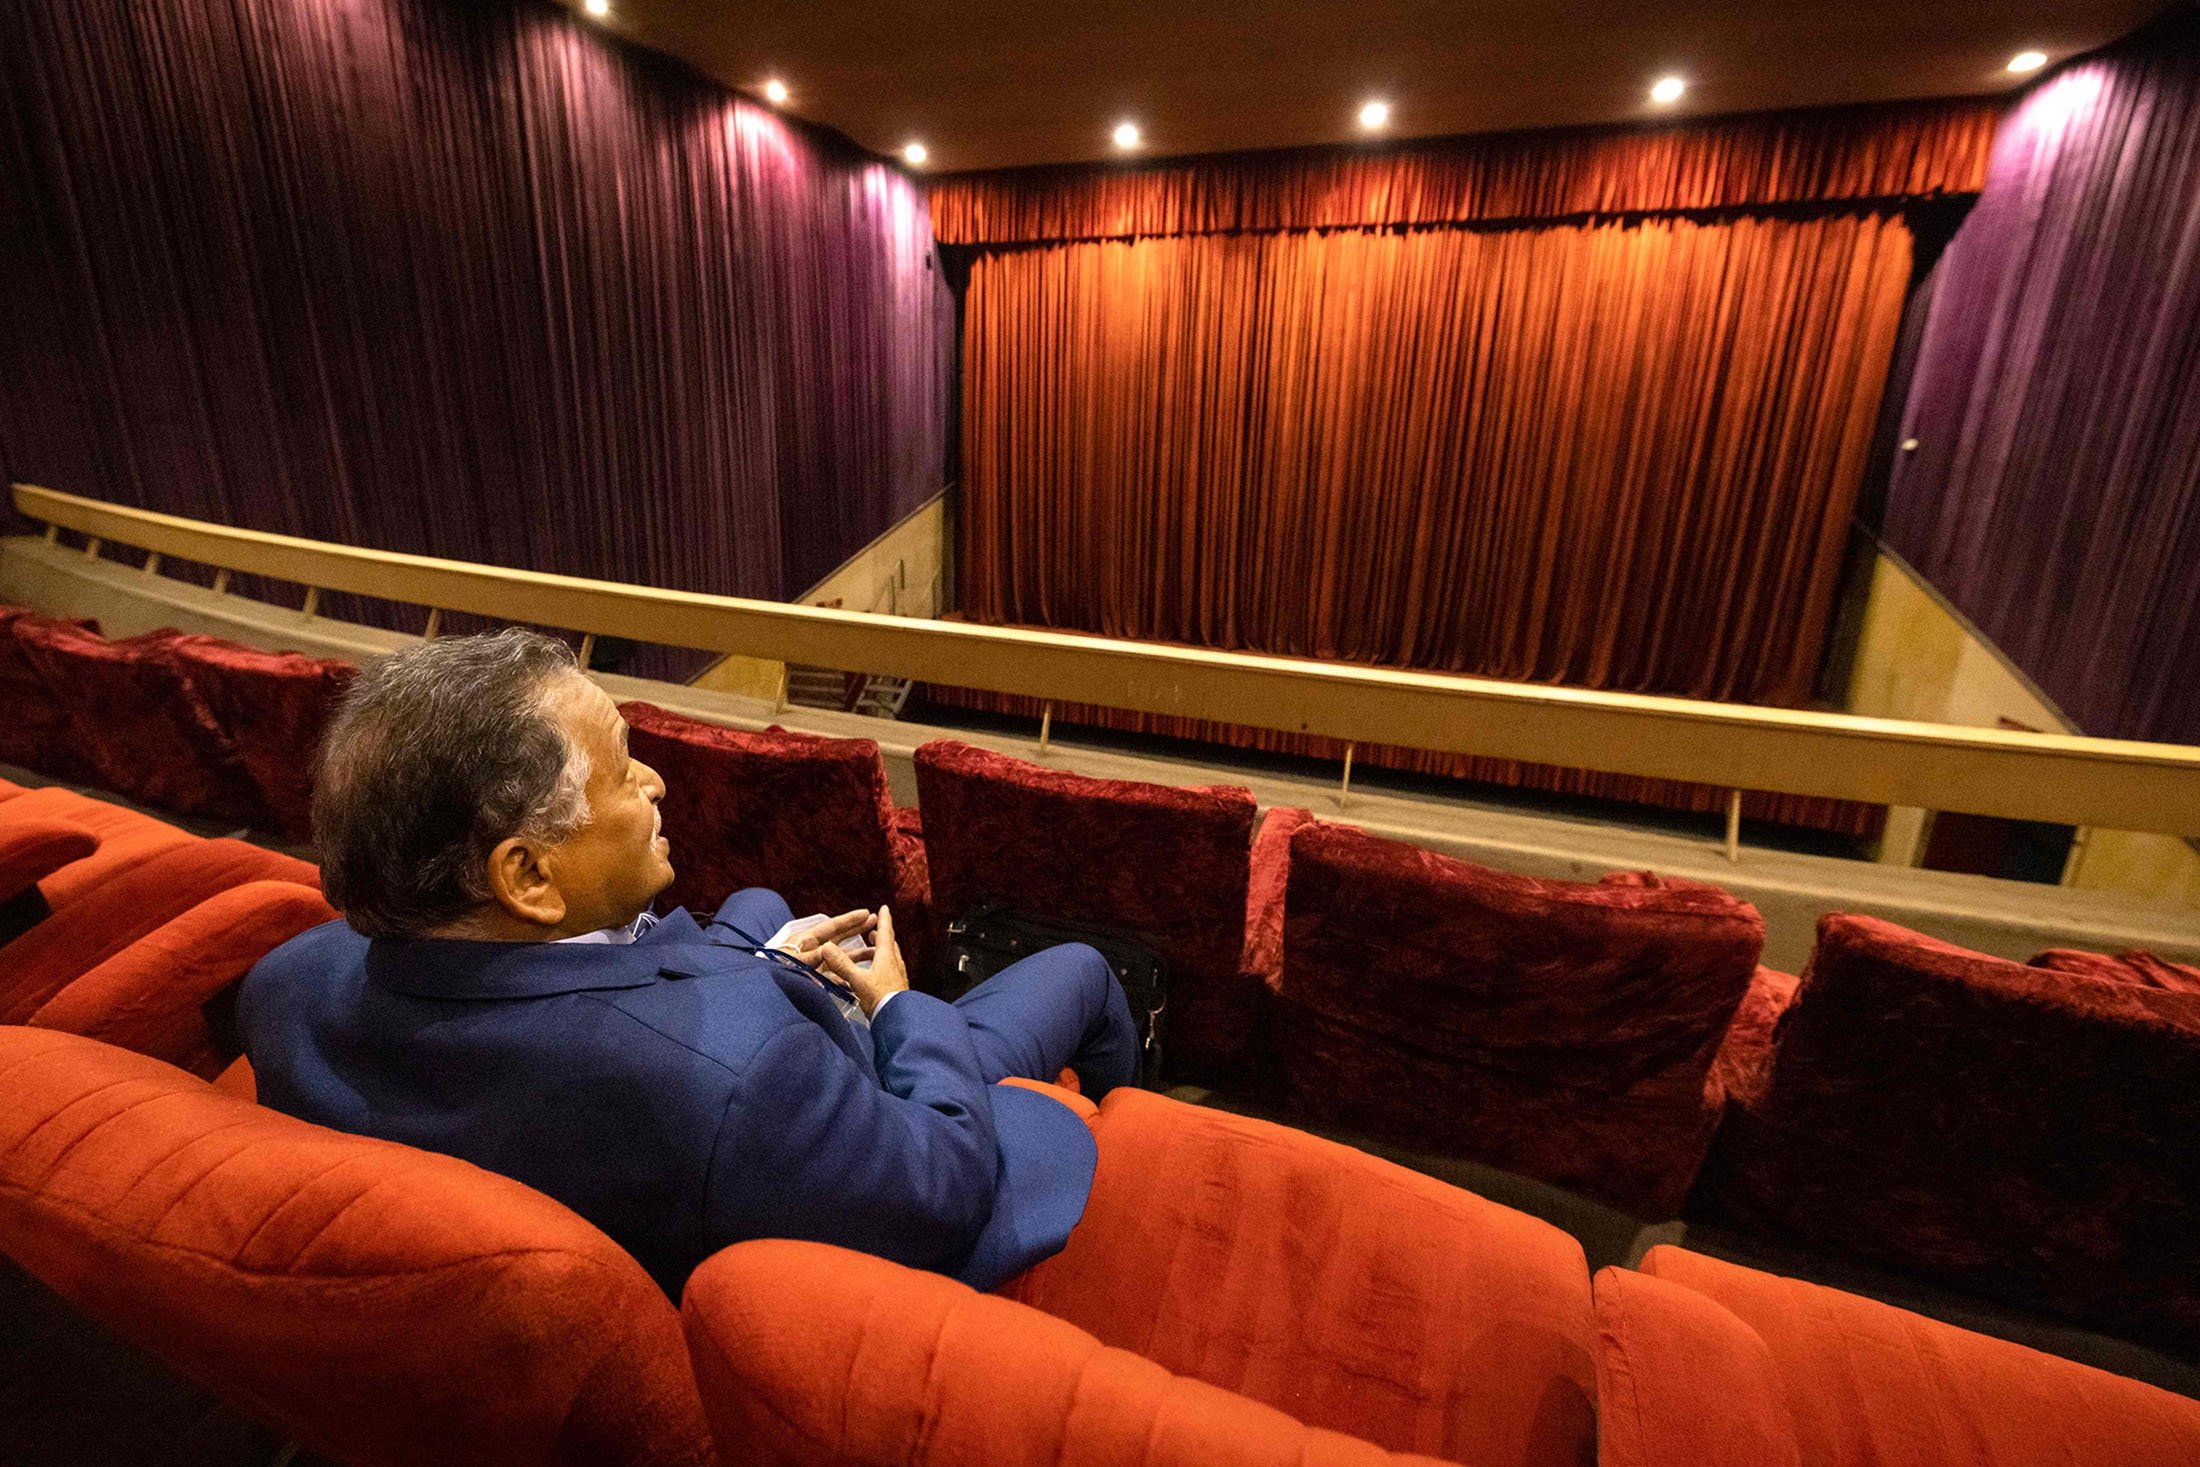 Yahla Yahla, who worked as a projectionist in Morocco for 35 years, visits the empty Le Rif cinema in the western city of Casablanca, Morocco, Jan. 24, 2022. (AFP Photo)